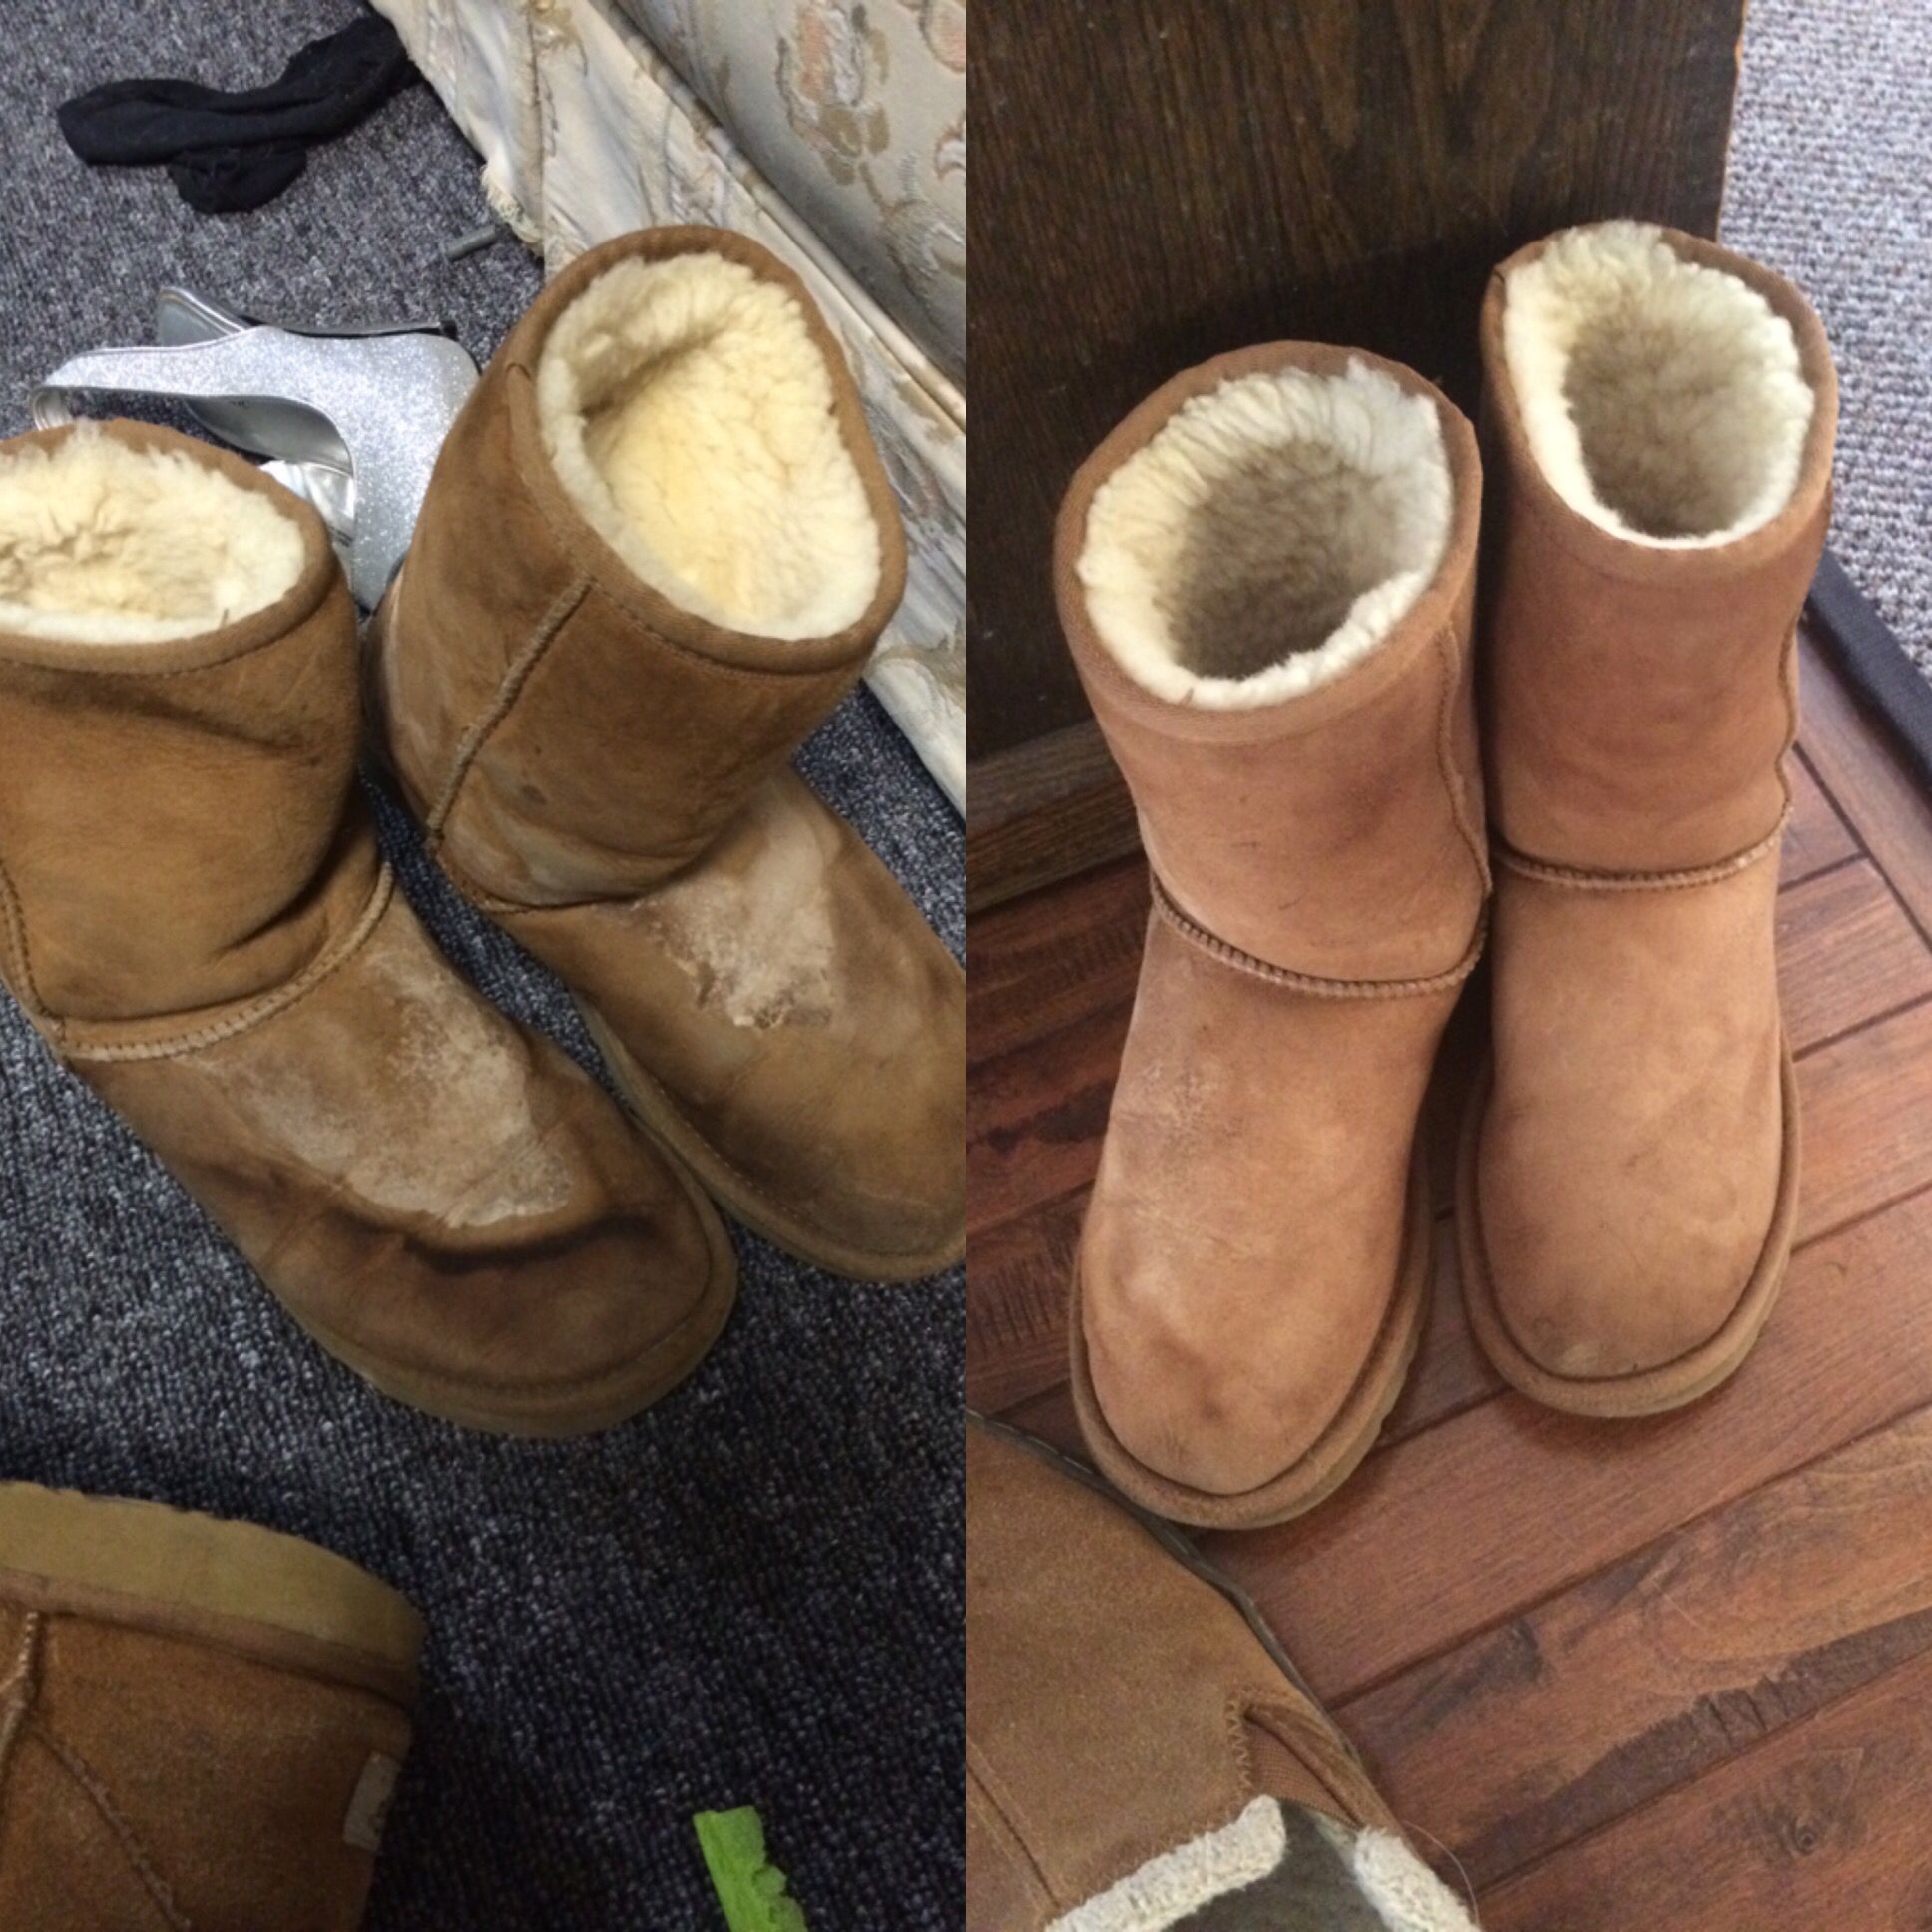 cleaning ugg boots with vinegar